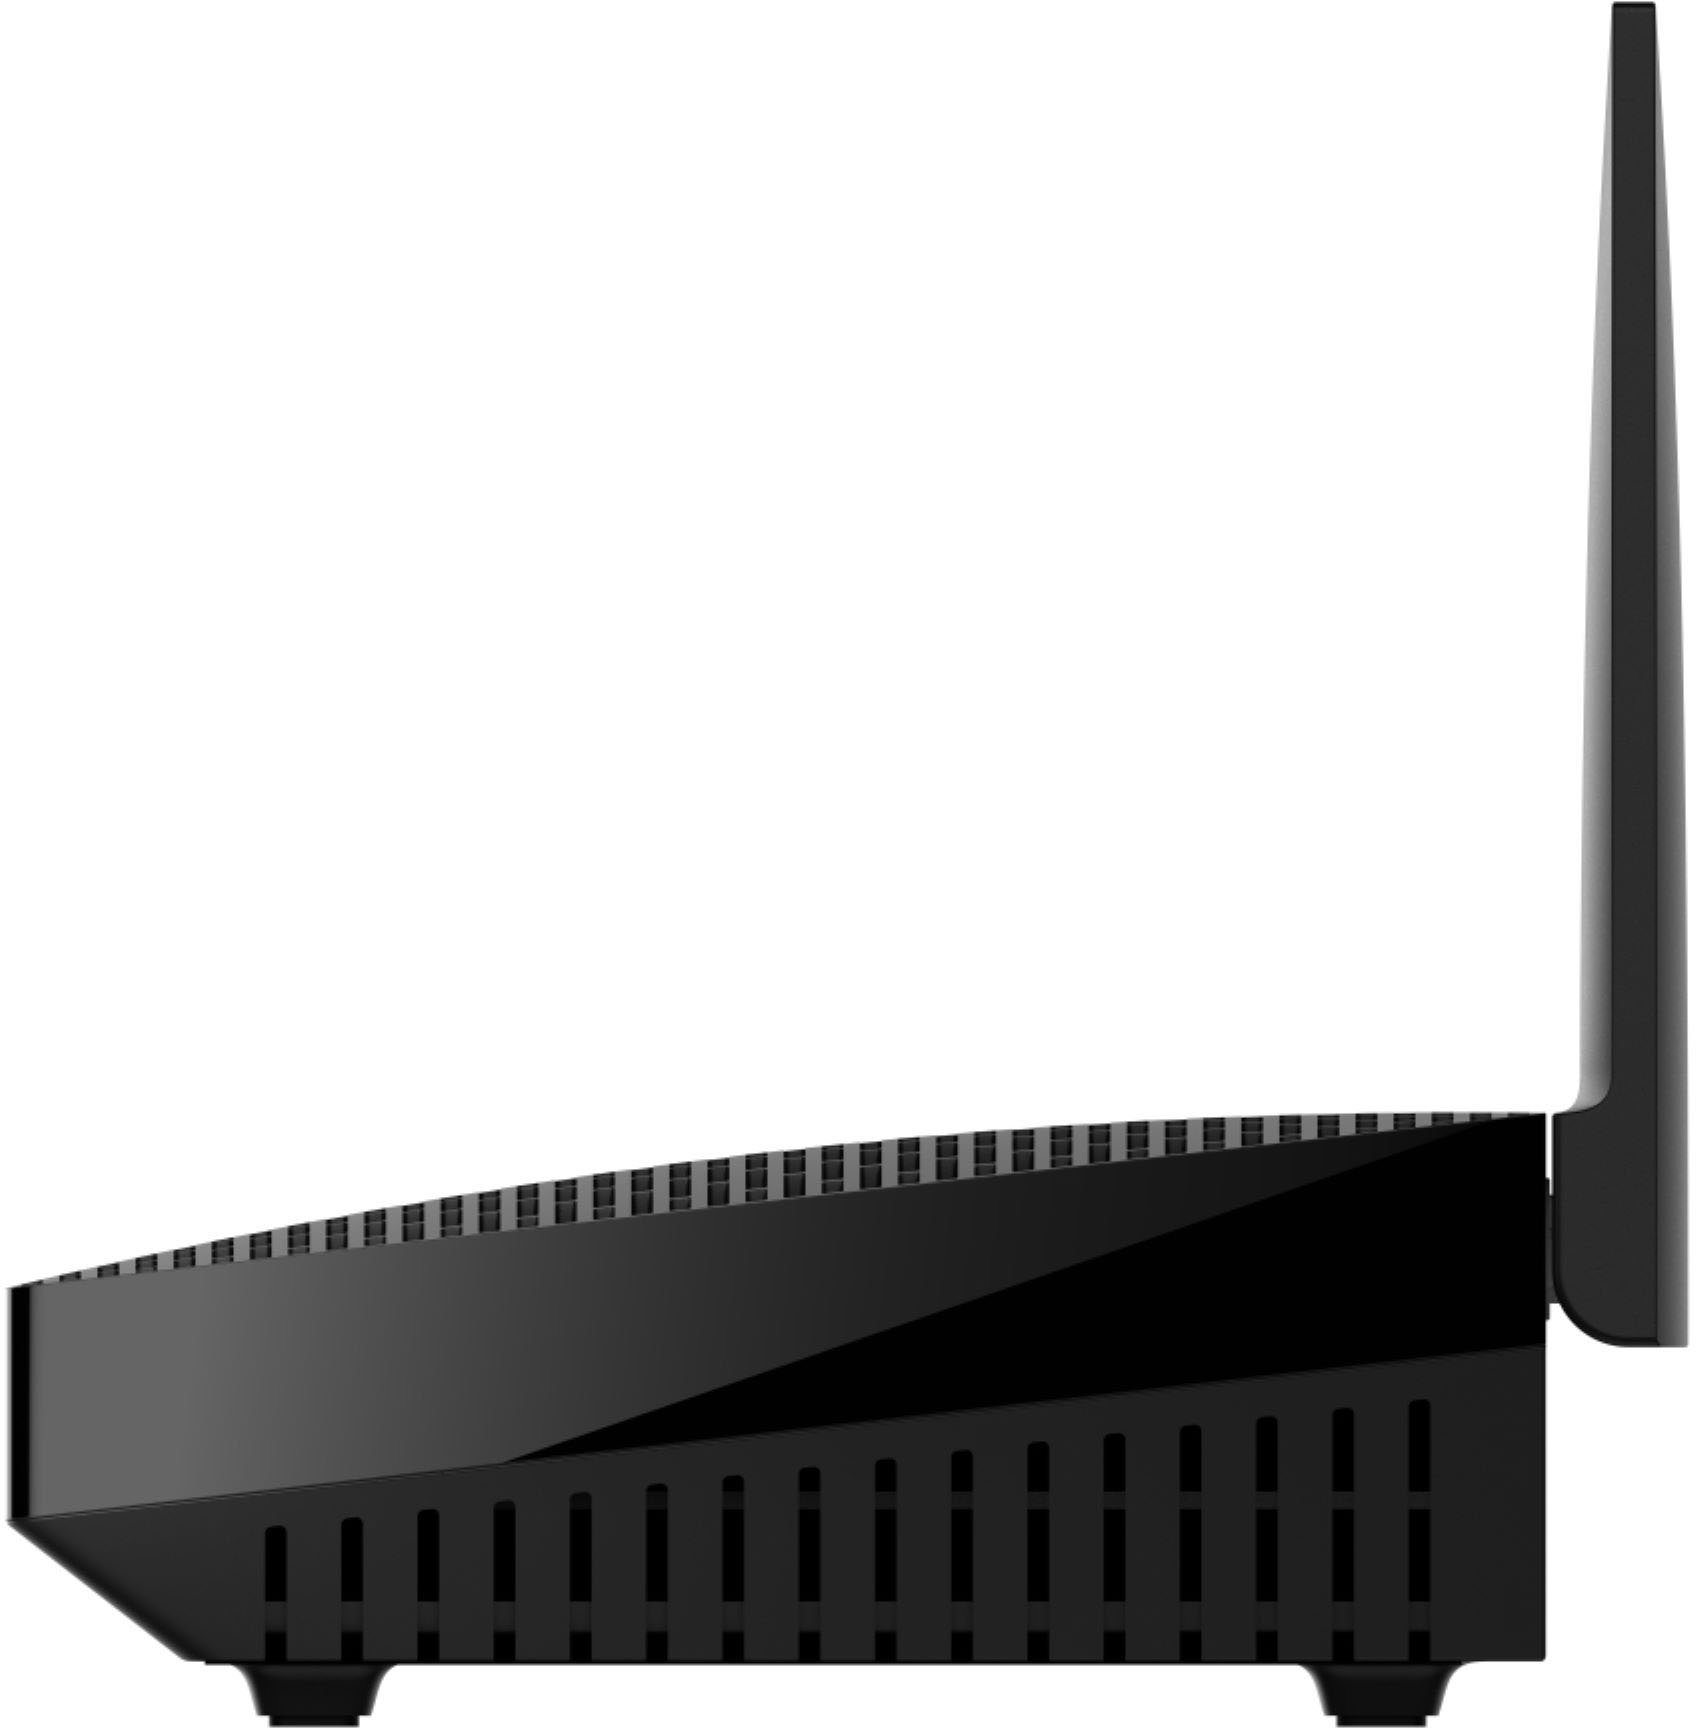 escalate Insanity Peave Linksys Hydra Pro 6 AX5400 Dual-Band Mesh Wi-Fi Router MR5500 - Best Buy